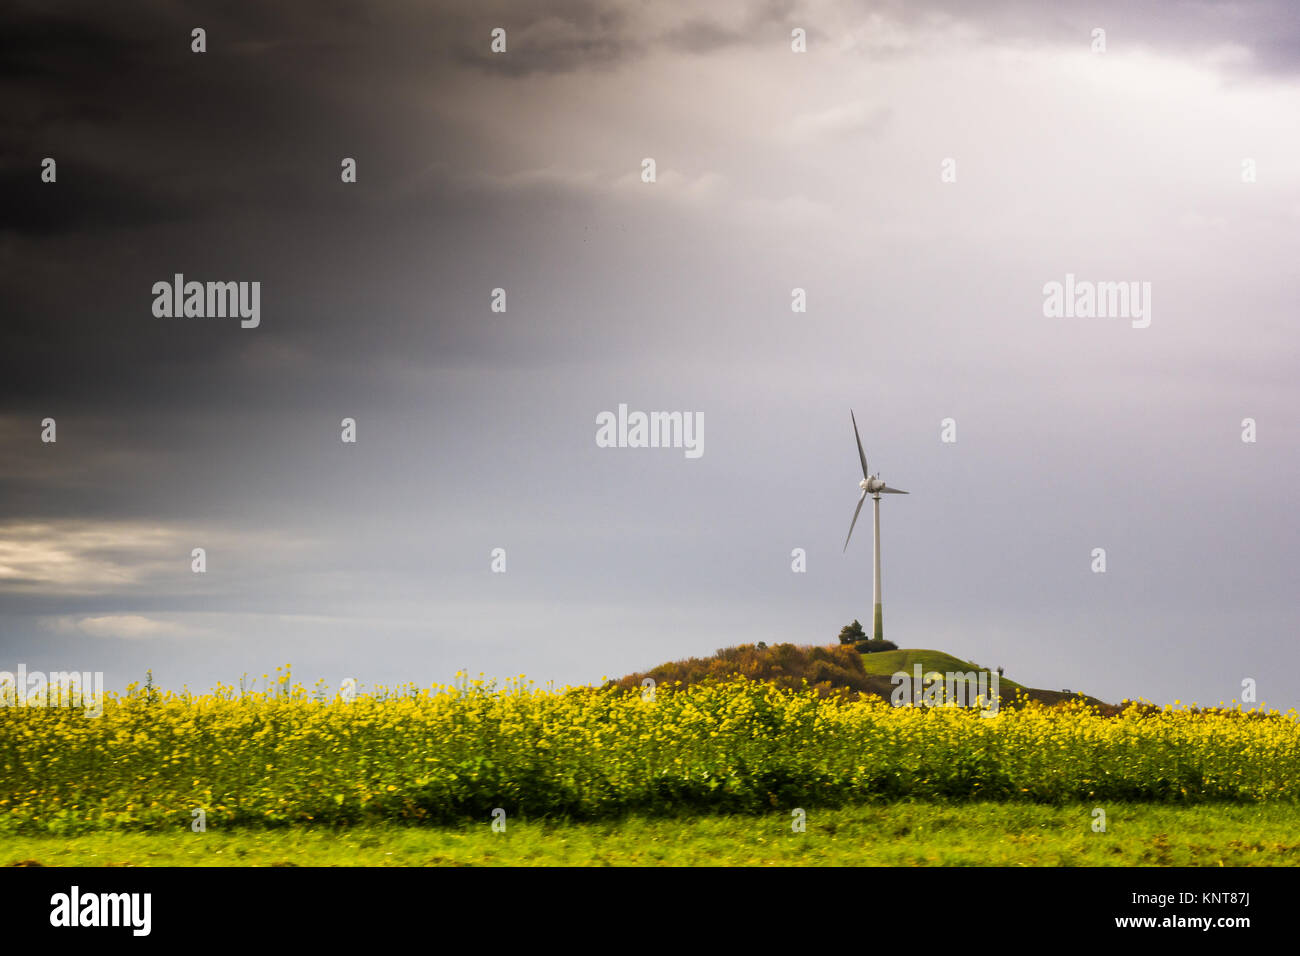 Single Windmill Turbine Hill Flowers Yellow Driving Highway Motion Blur Landscape Overcast Weather Sustainable Energy Germany Europe Green Clouds Heav Stock Photo